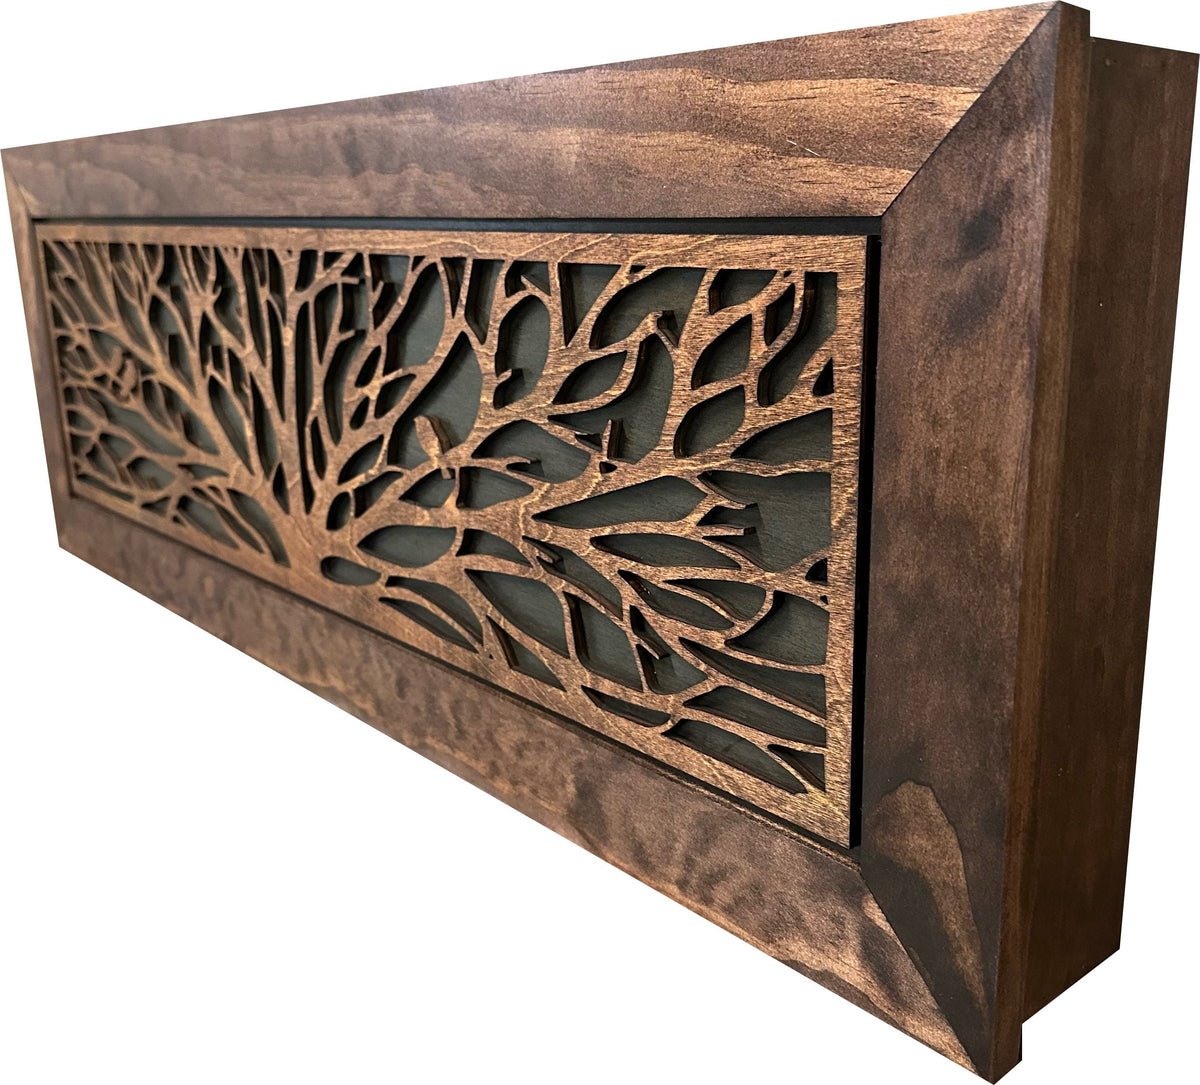 Large Wood Hidden Gun Cabinet Birds In A Tree Wall Decoration - Hidden Gun Safe To Securely Store Your Gun In Plain Sight Armadillo Safe and Vault